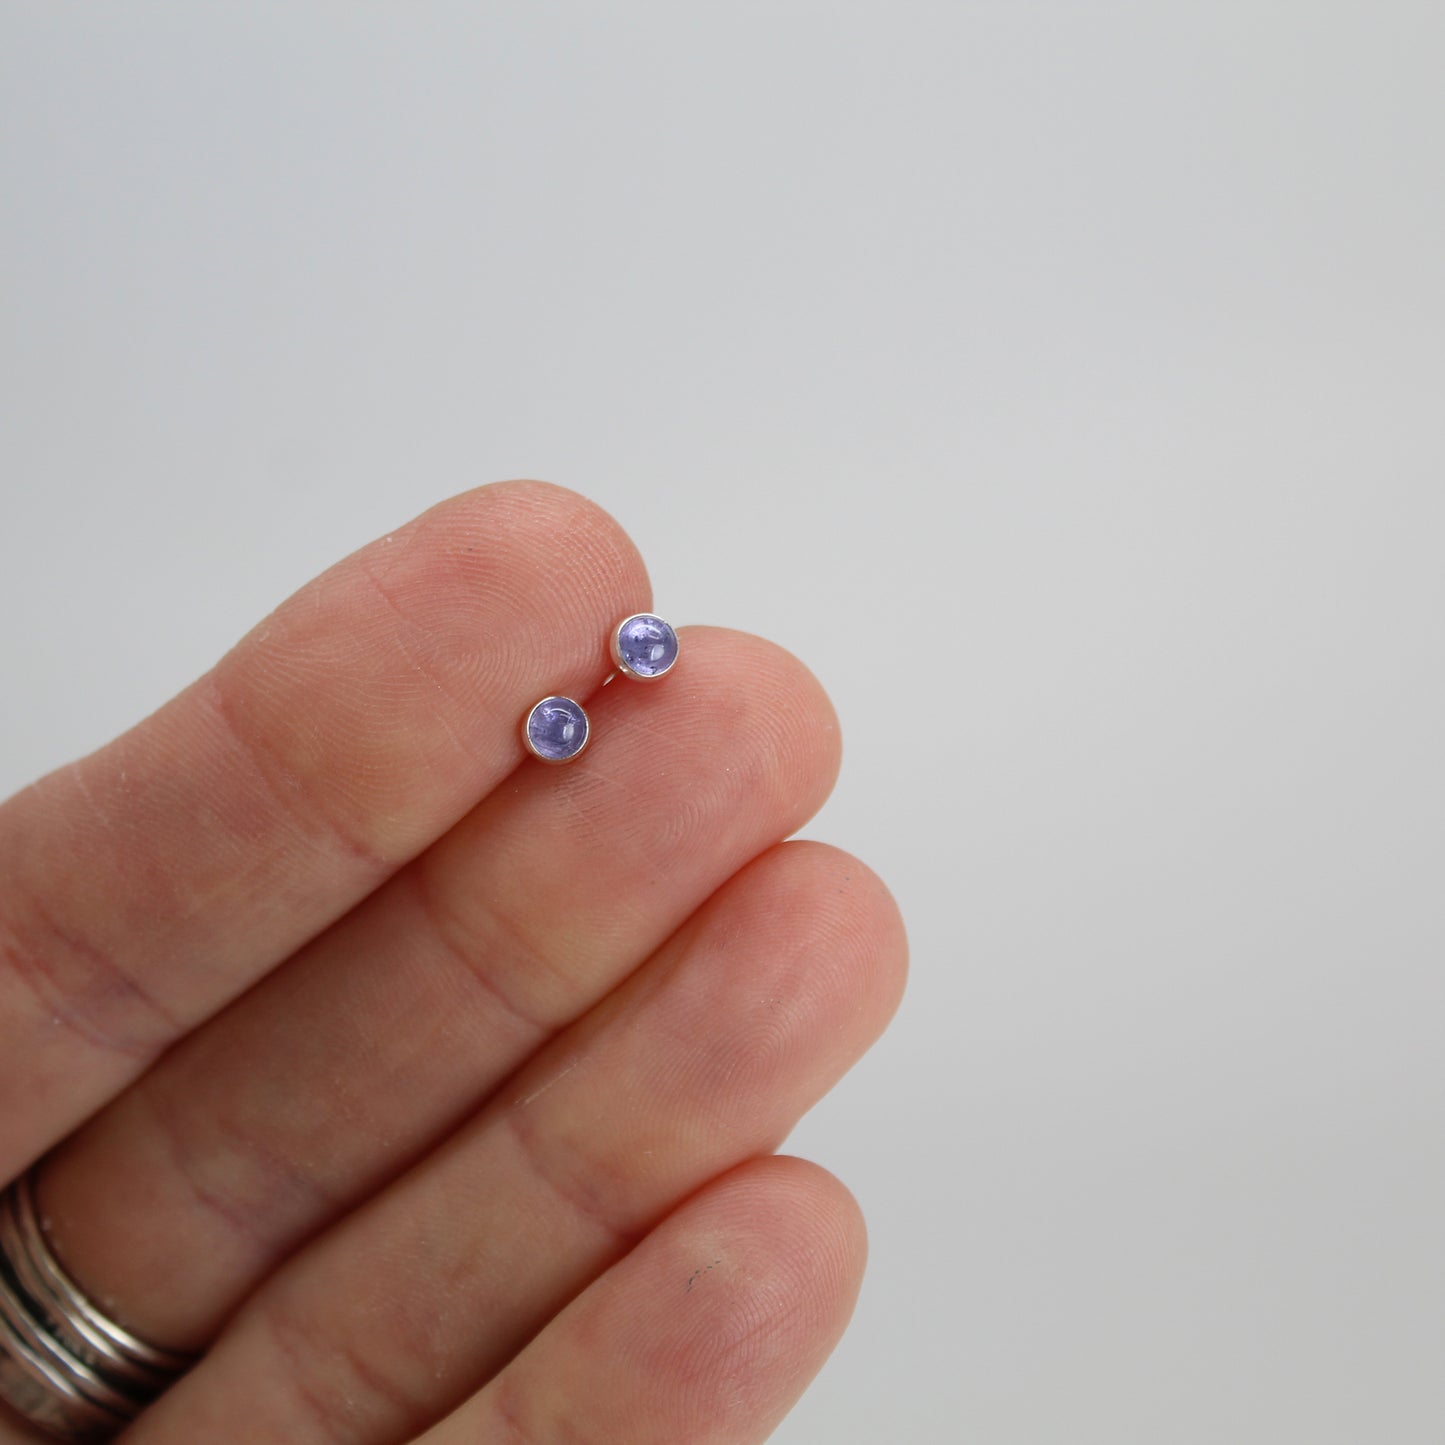 Load image into Gallery viewer, Tanzanite Stud Earrings Small 4mm Sterling Silver
